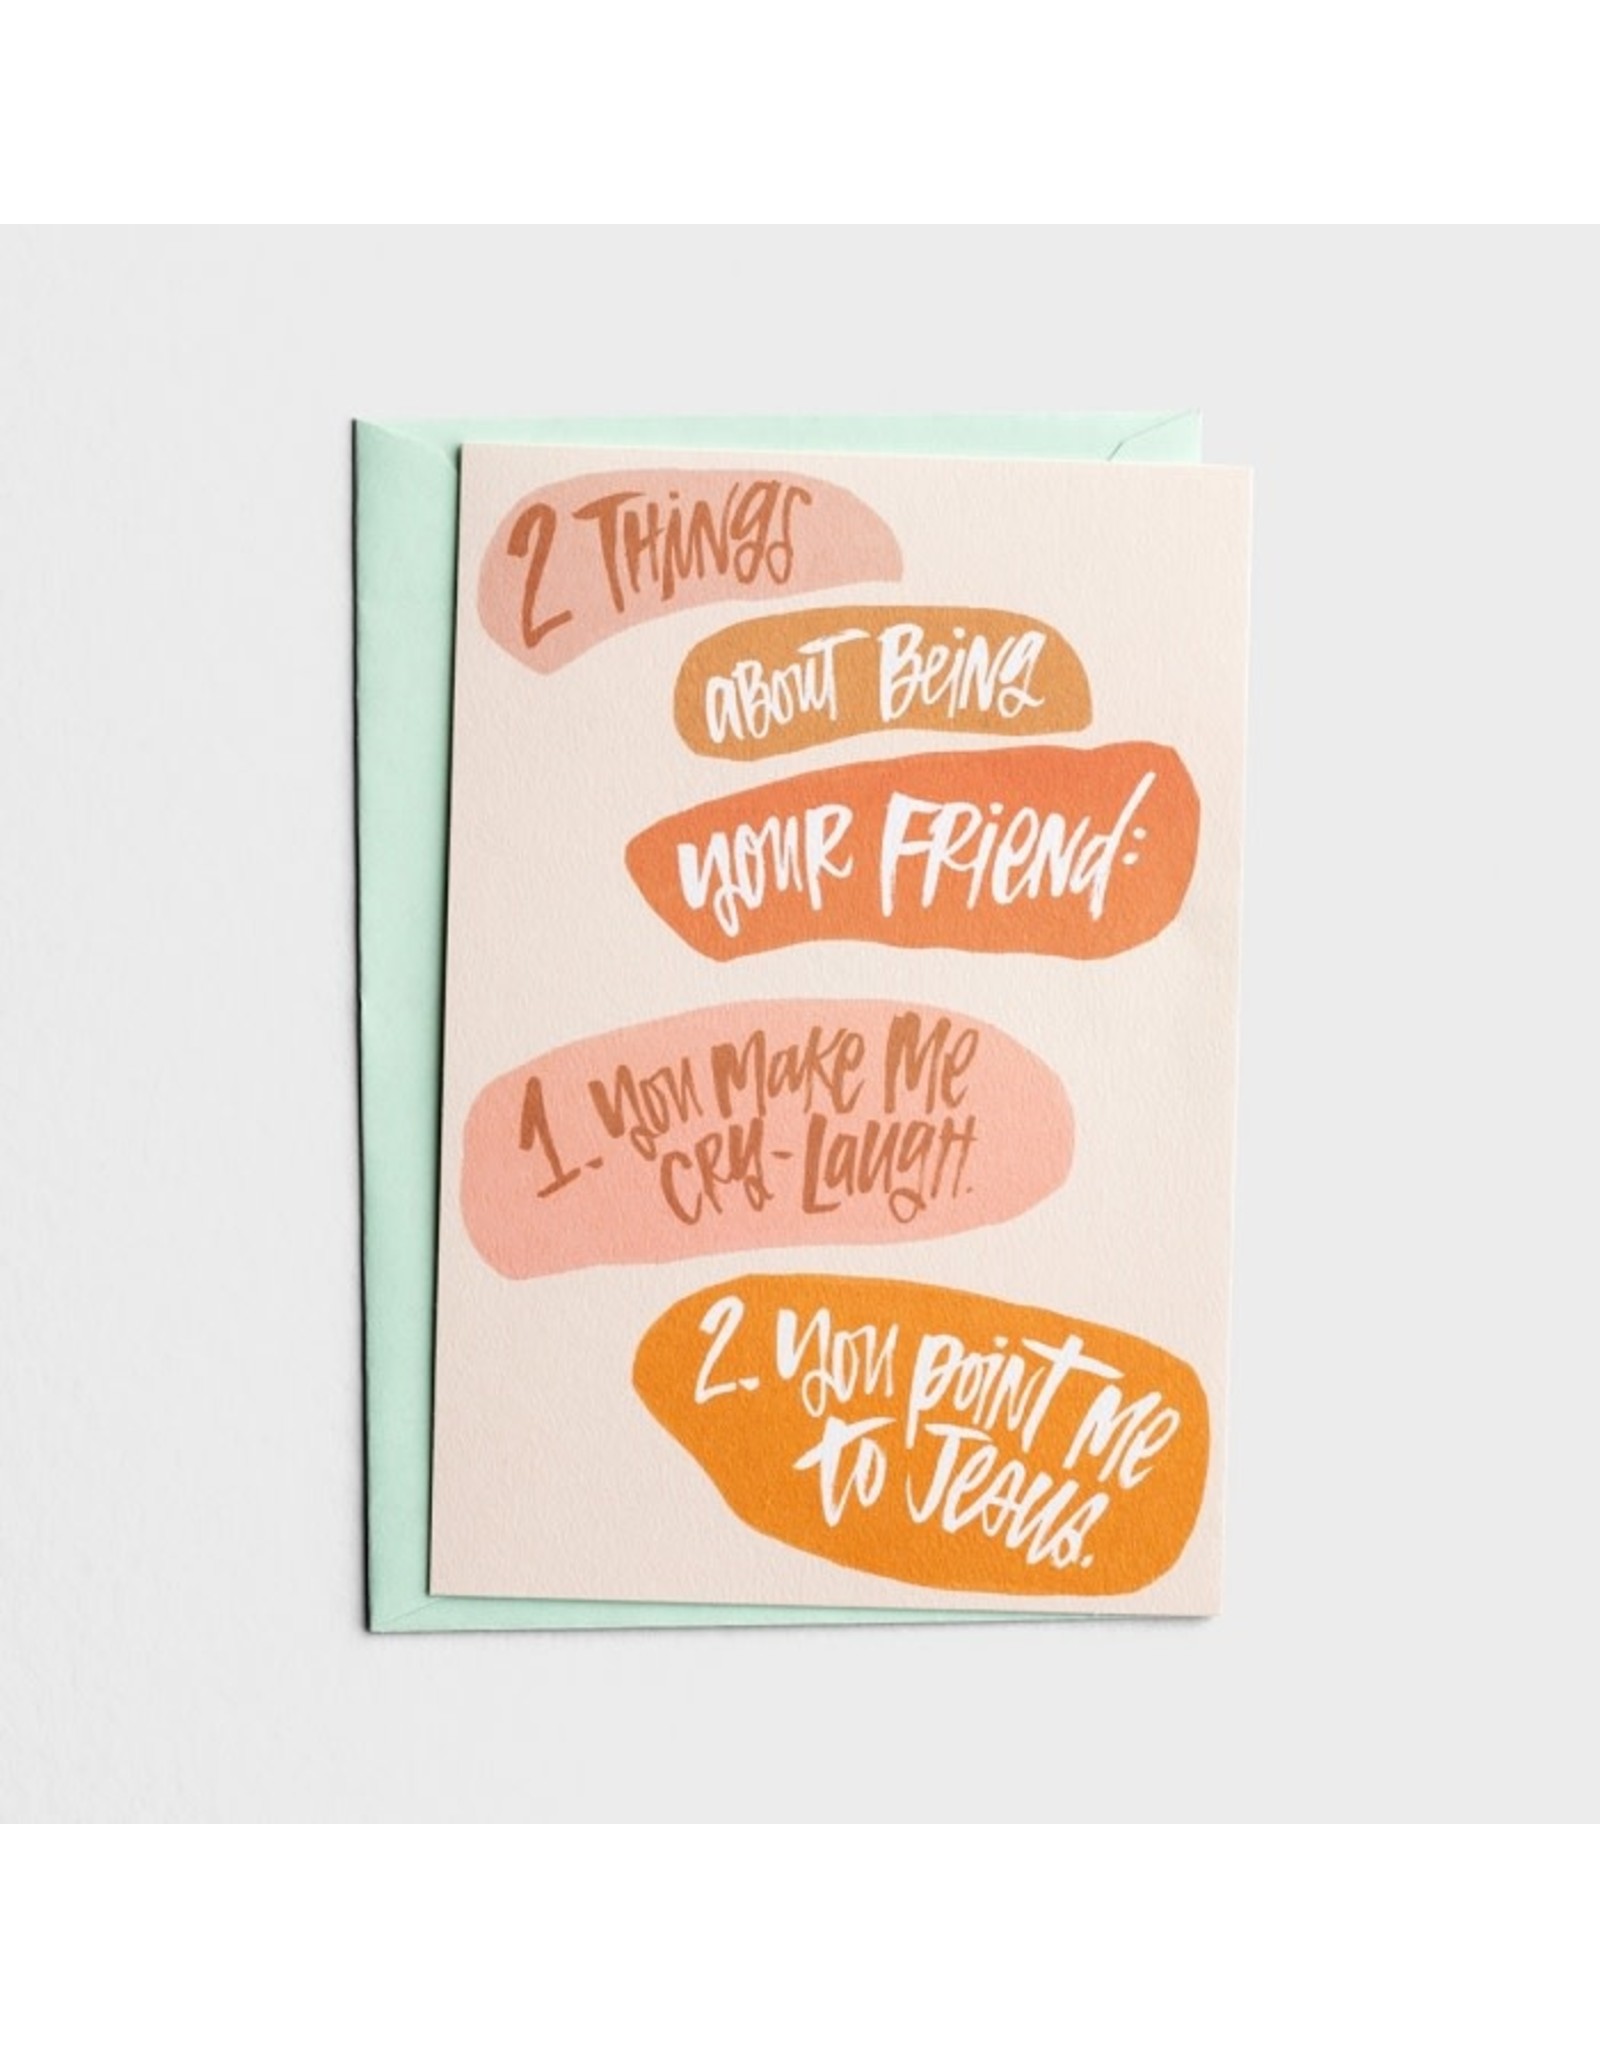 Friendship Card - 2 Things About Being Your Friend